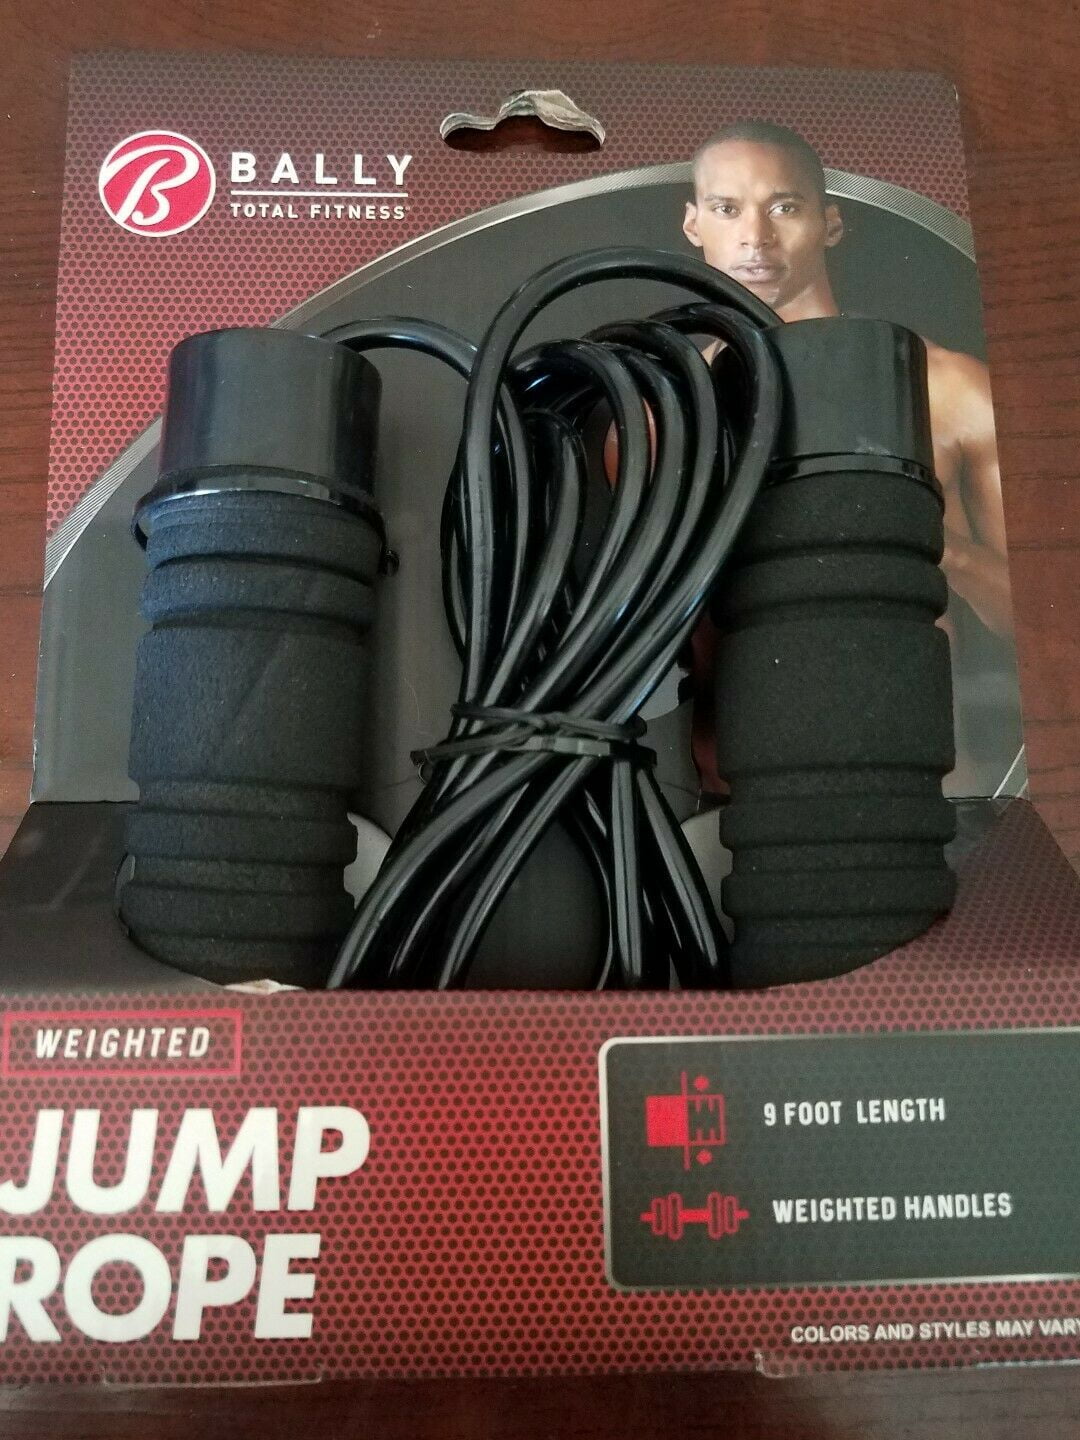 Bally Bally Total Fitness Weighted Jump Rope 9 Foot Length Adjustable Black 